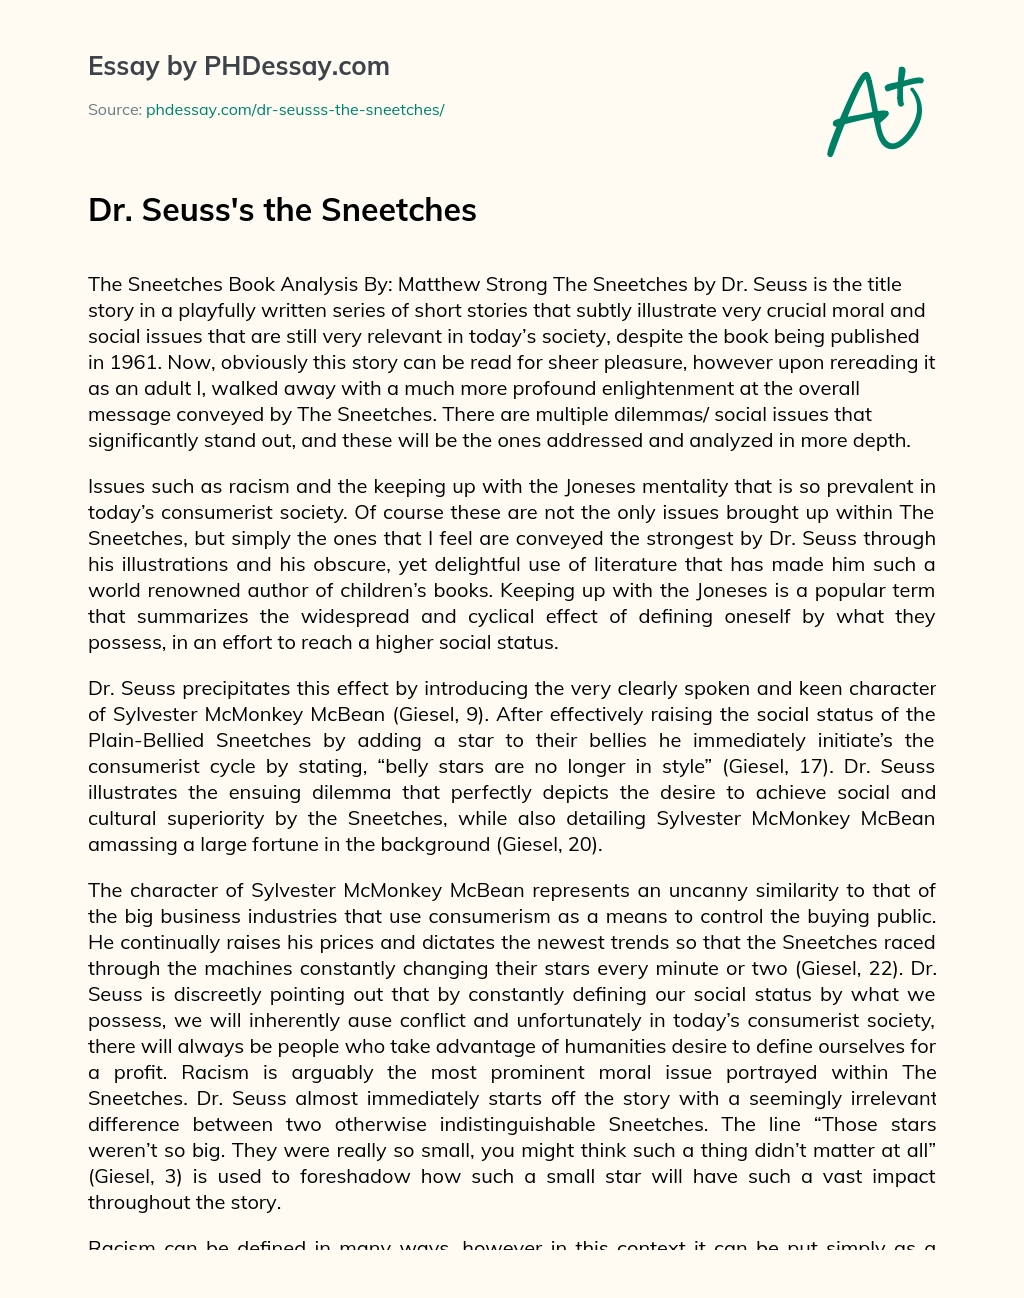 Dr. Seuss’s the Sneetches essay